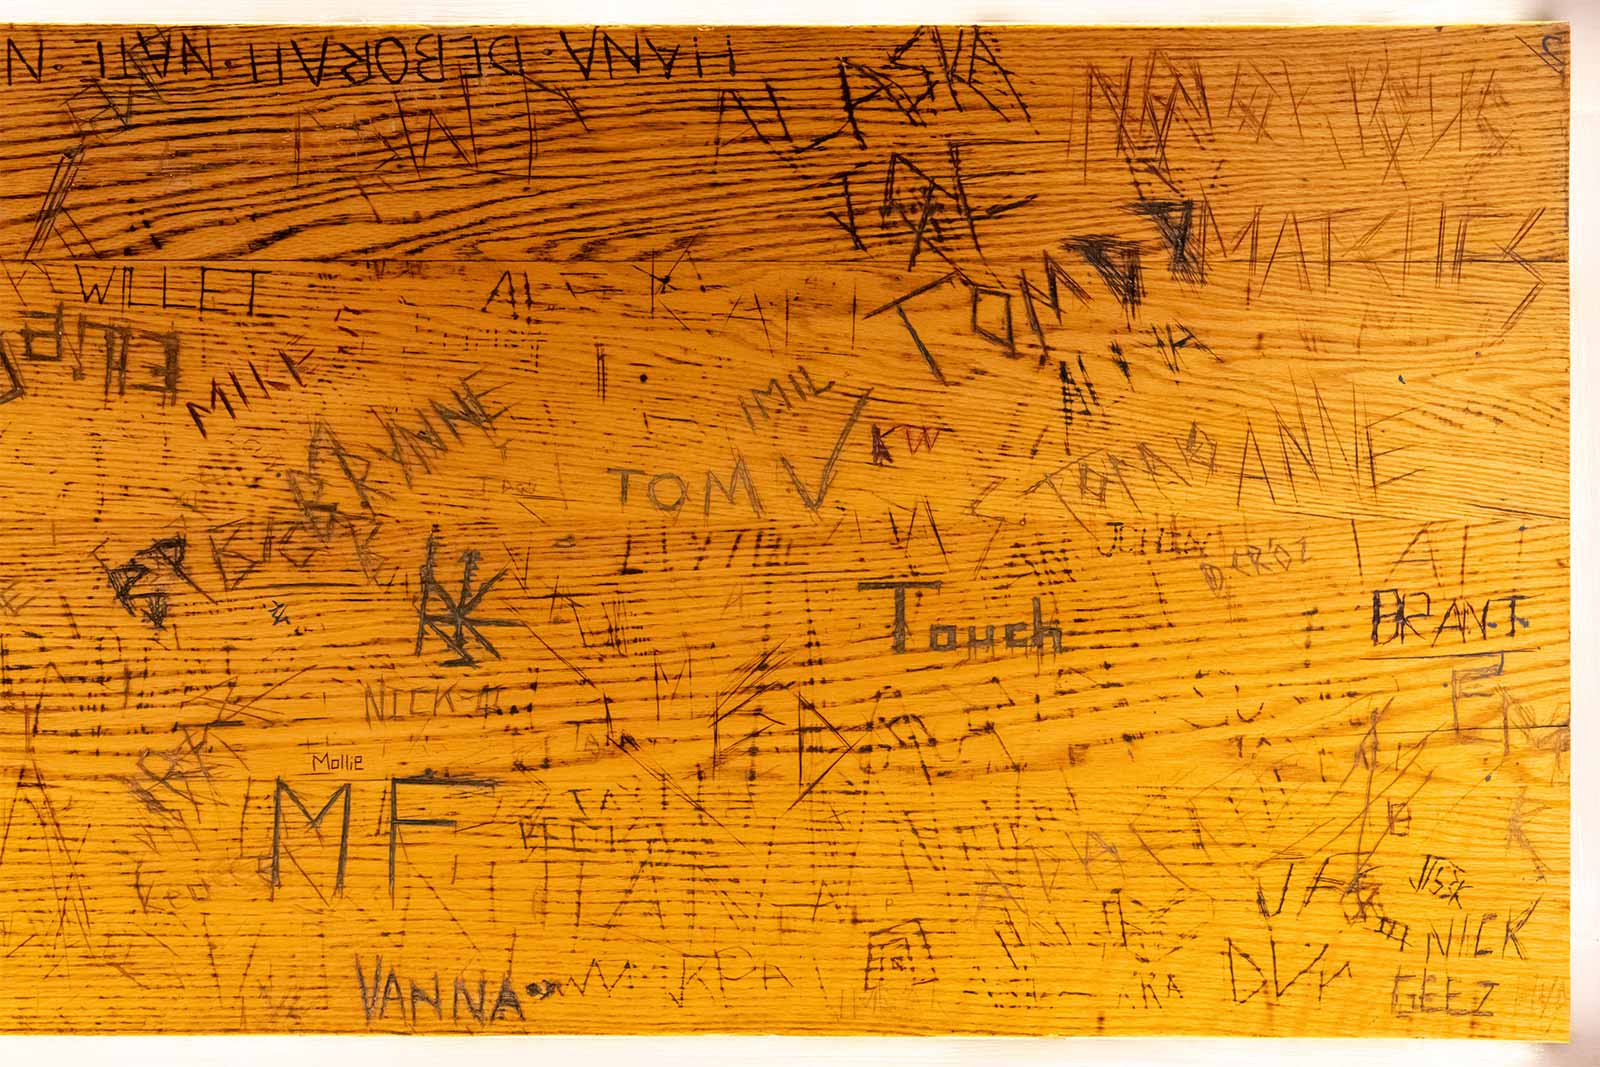 A photo of a wooden surface with names and letters roughly scratched into it